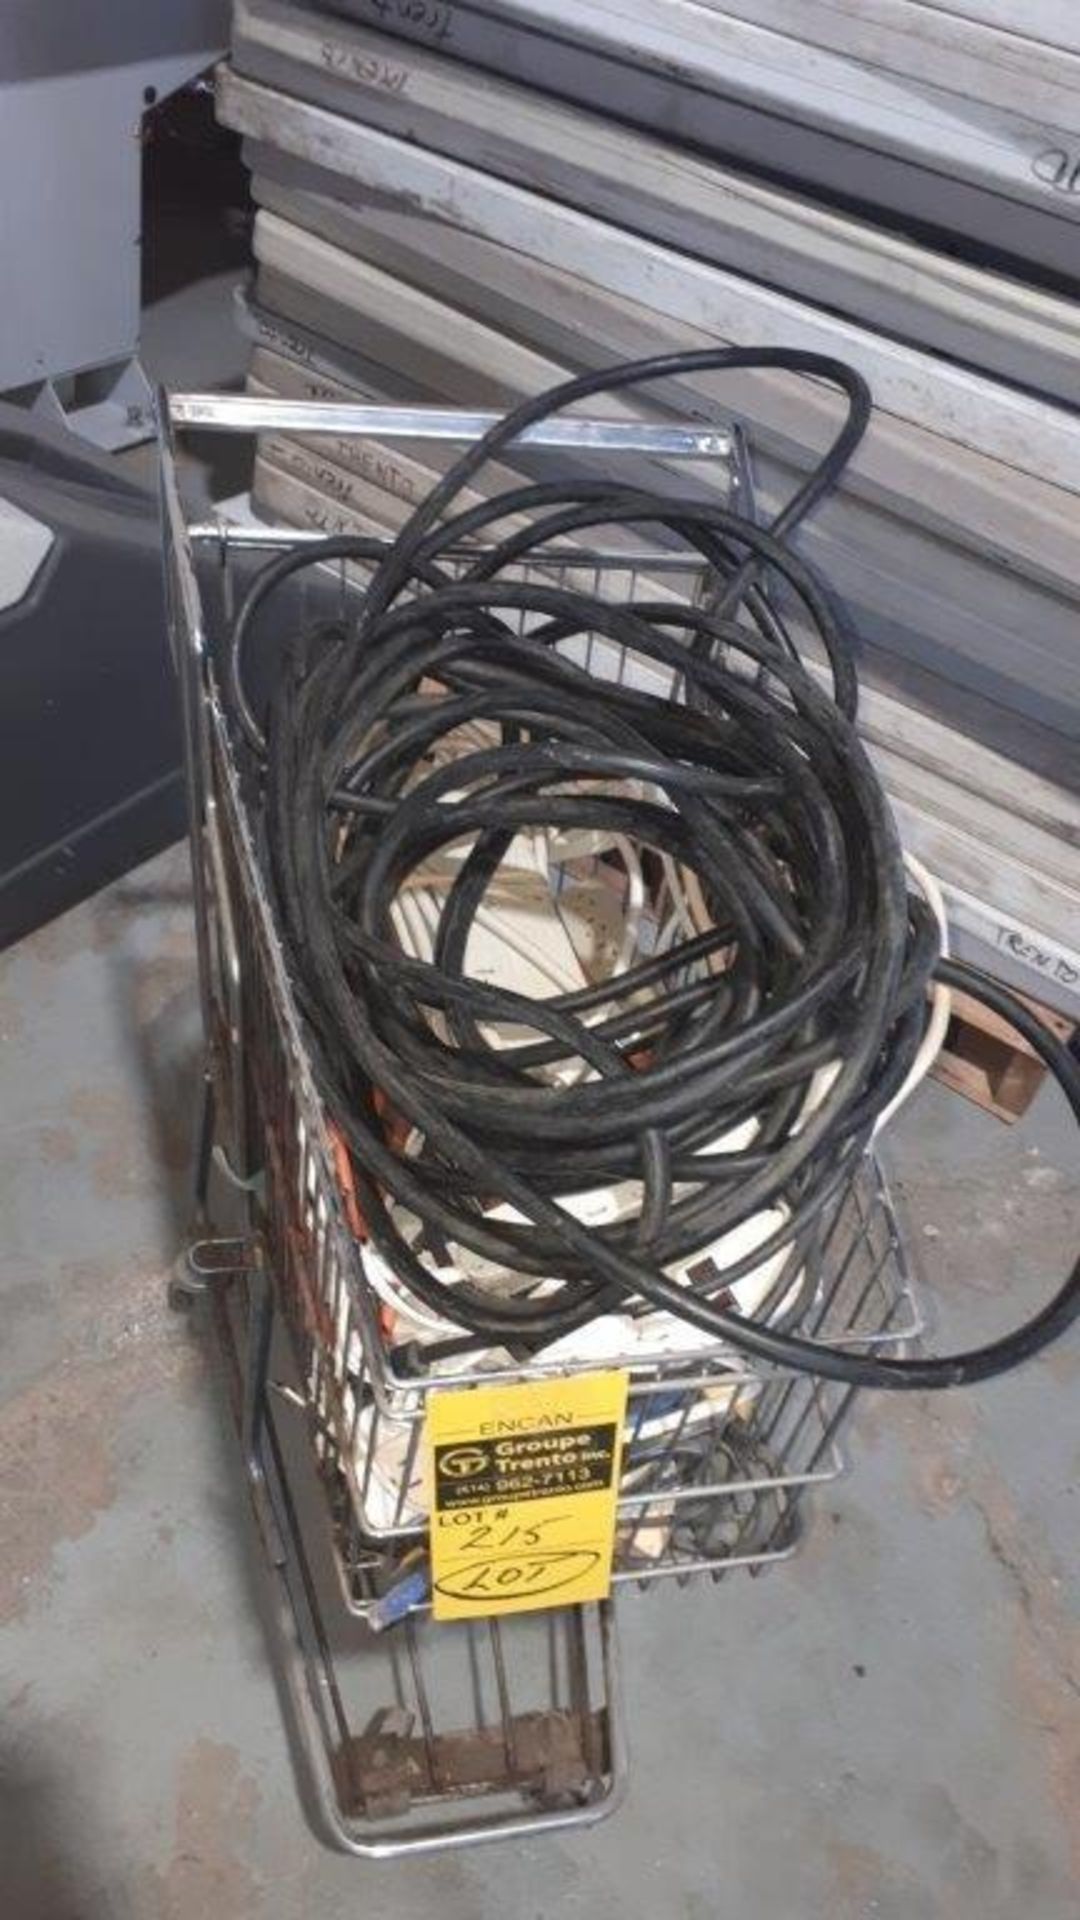 LOT: Assorted Extensions, Wires, etc. c/w cart